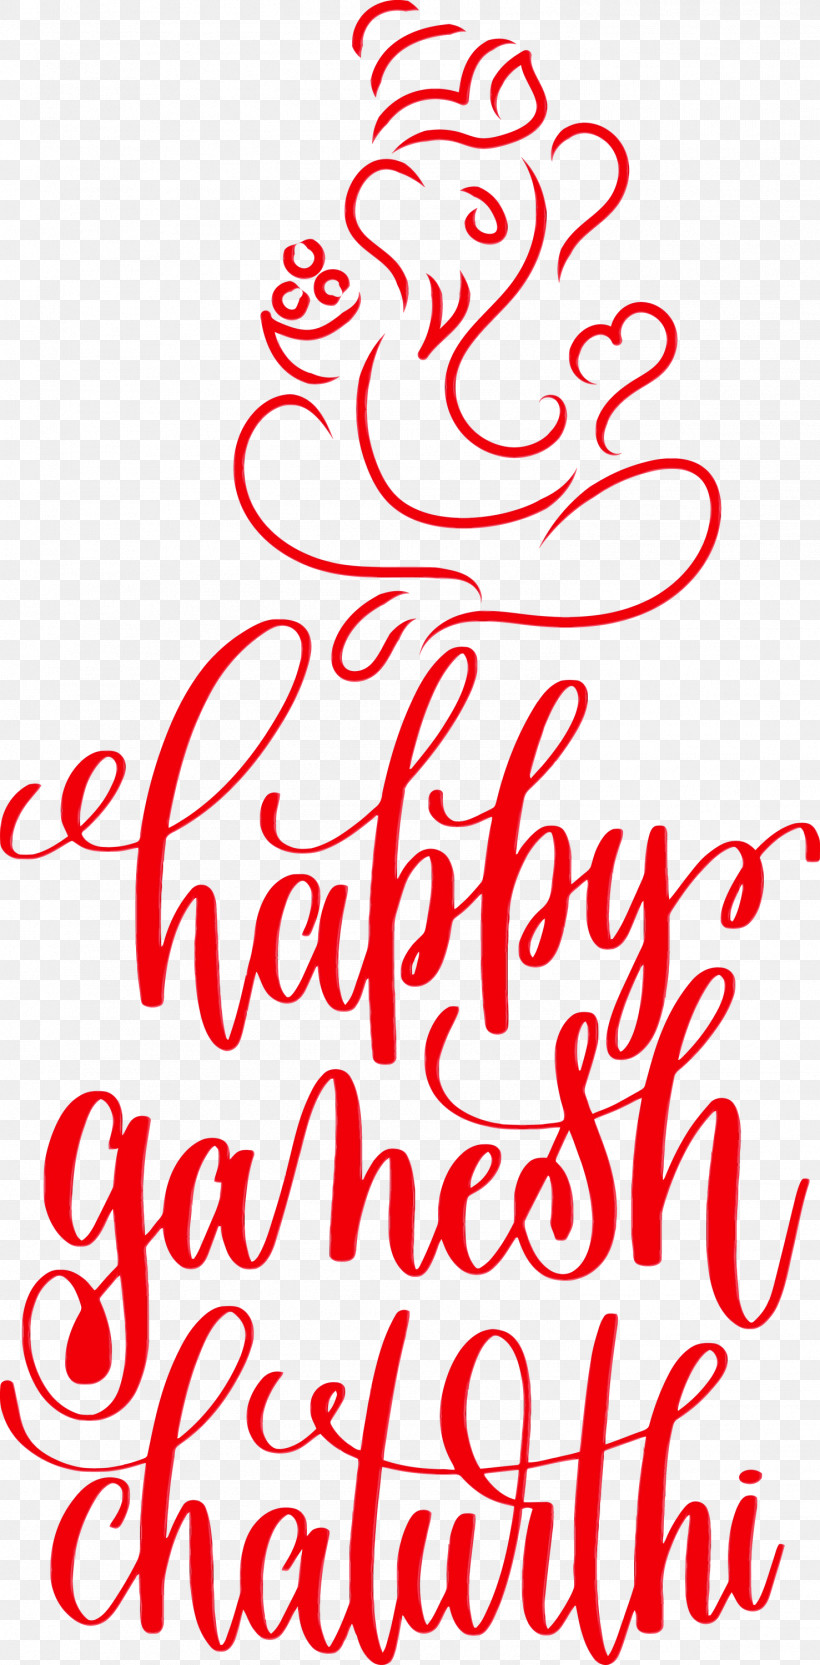 Calligraphy Line Meter Happiness Mathematics, PNG, 1477x3000px, Happy Ganesh Chaturthi, Calligraphy, Geometry, Happiness, Line Download Free